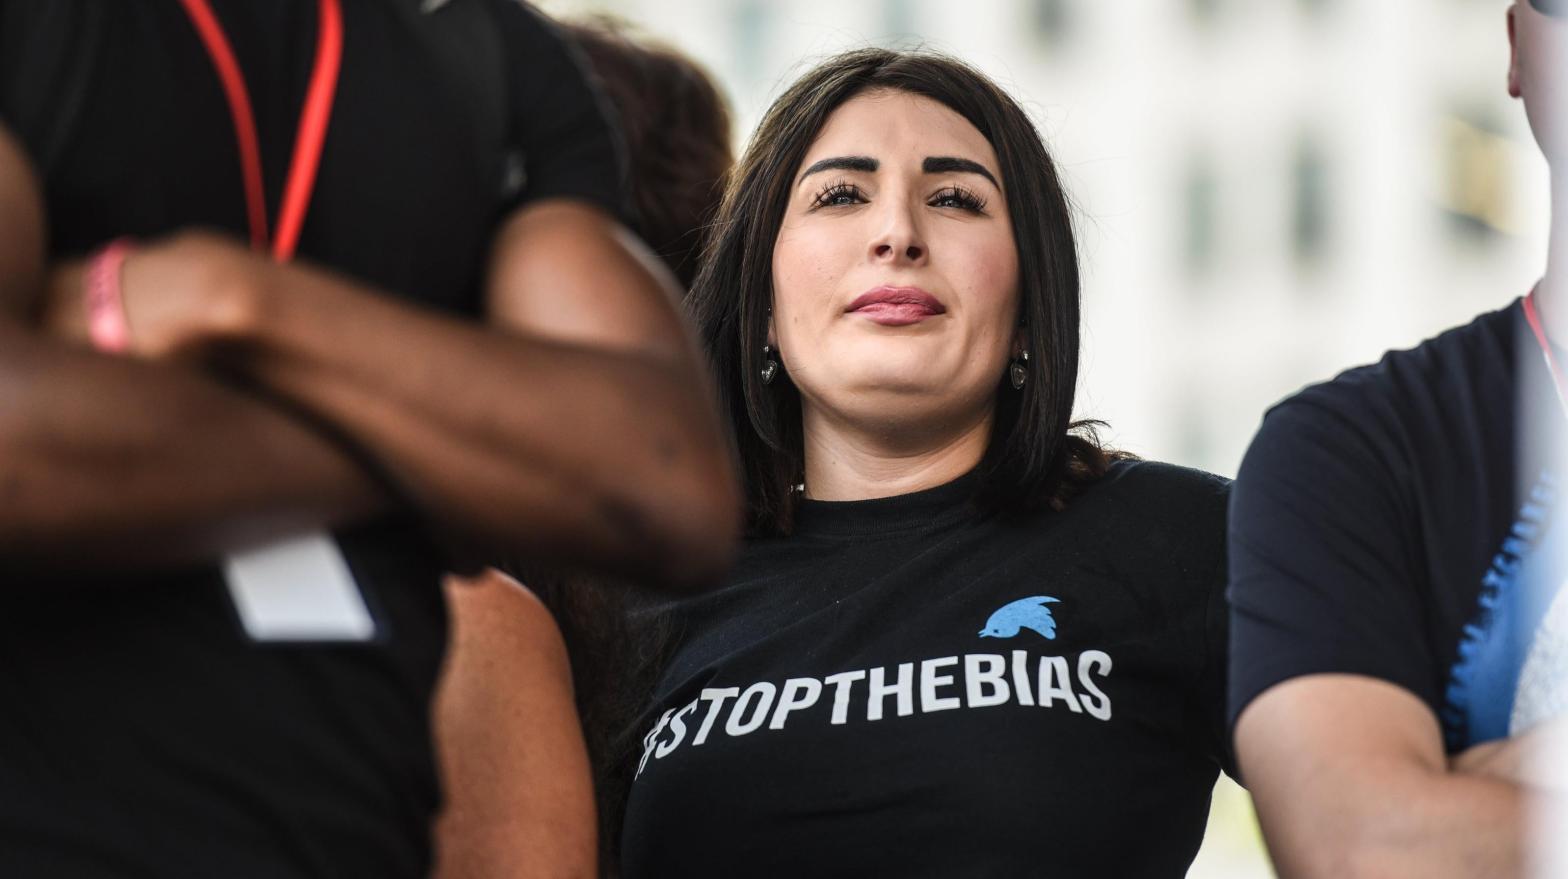 Far-right media figure Laura Loomer who has unsuccessfully sued Twitter and Facebook for banning her on their platforms, pictured in 2019. (Photo: Stephanie Keith, Getty Images)